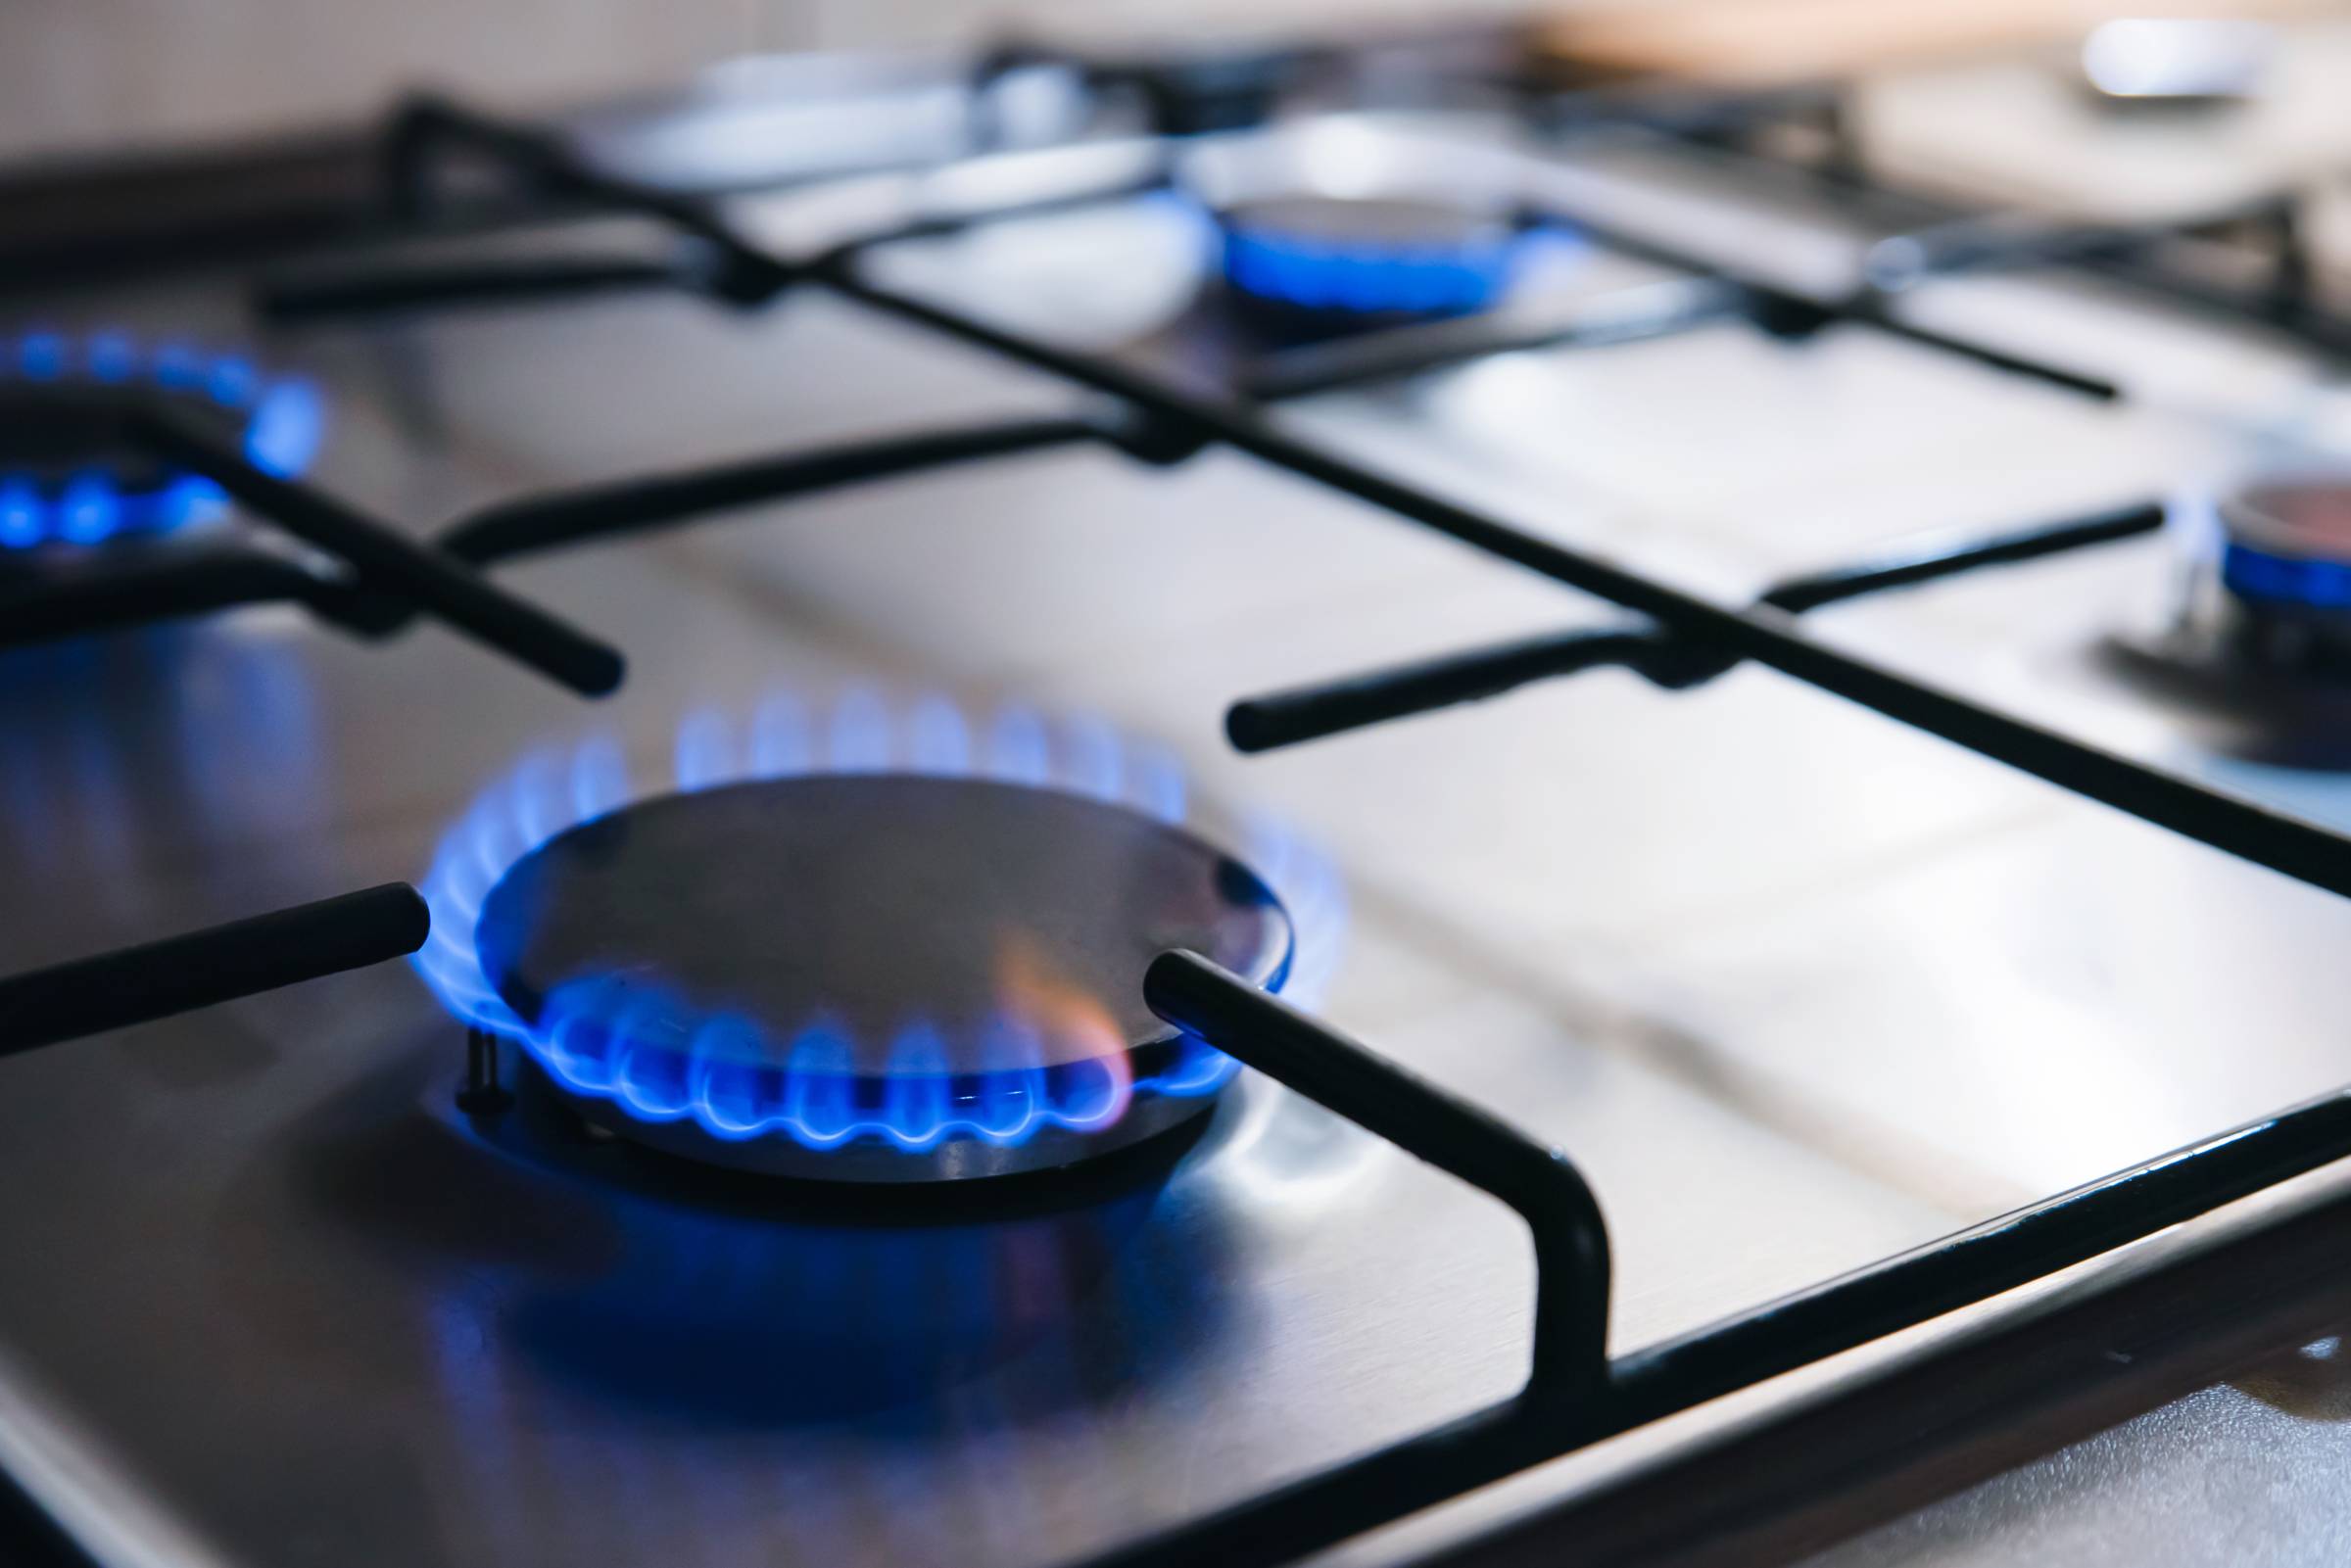 Gas stoves might pose risks to both our planet and health